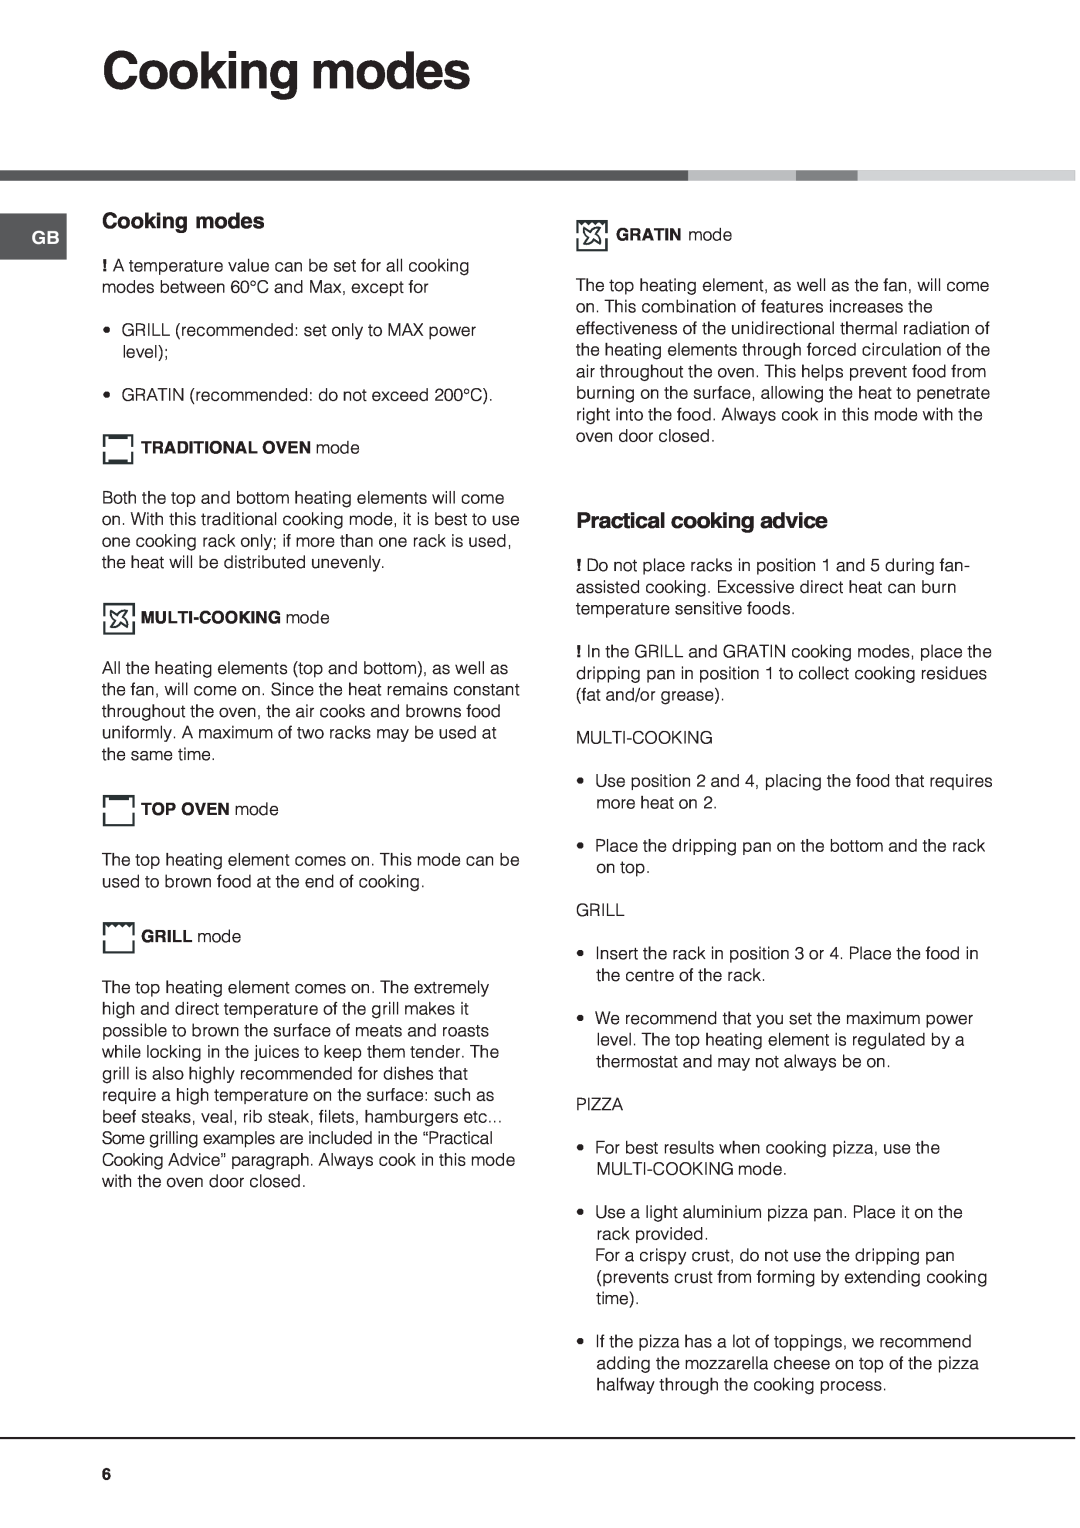 Hotpoint SN56EX operating instructions Cooking modes, Practical cooking advice 